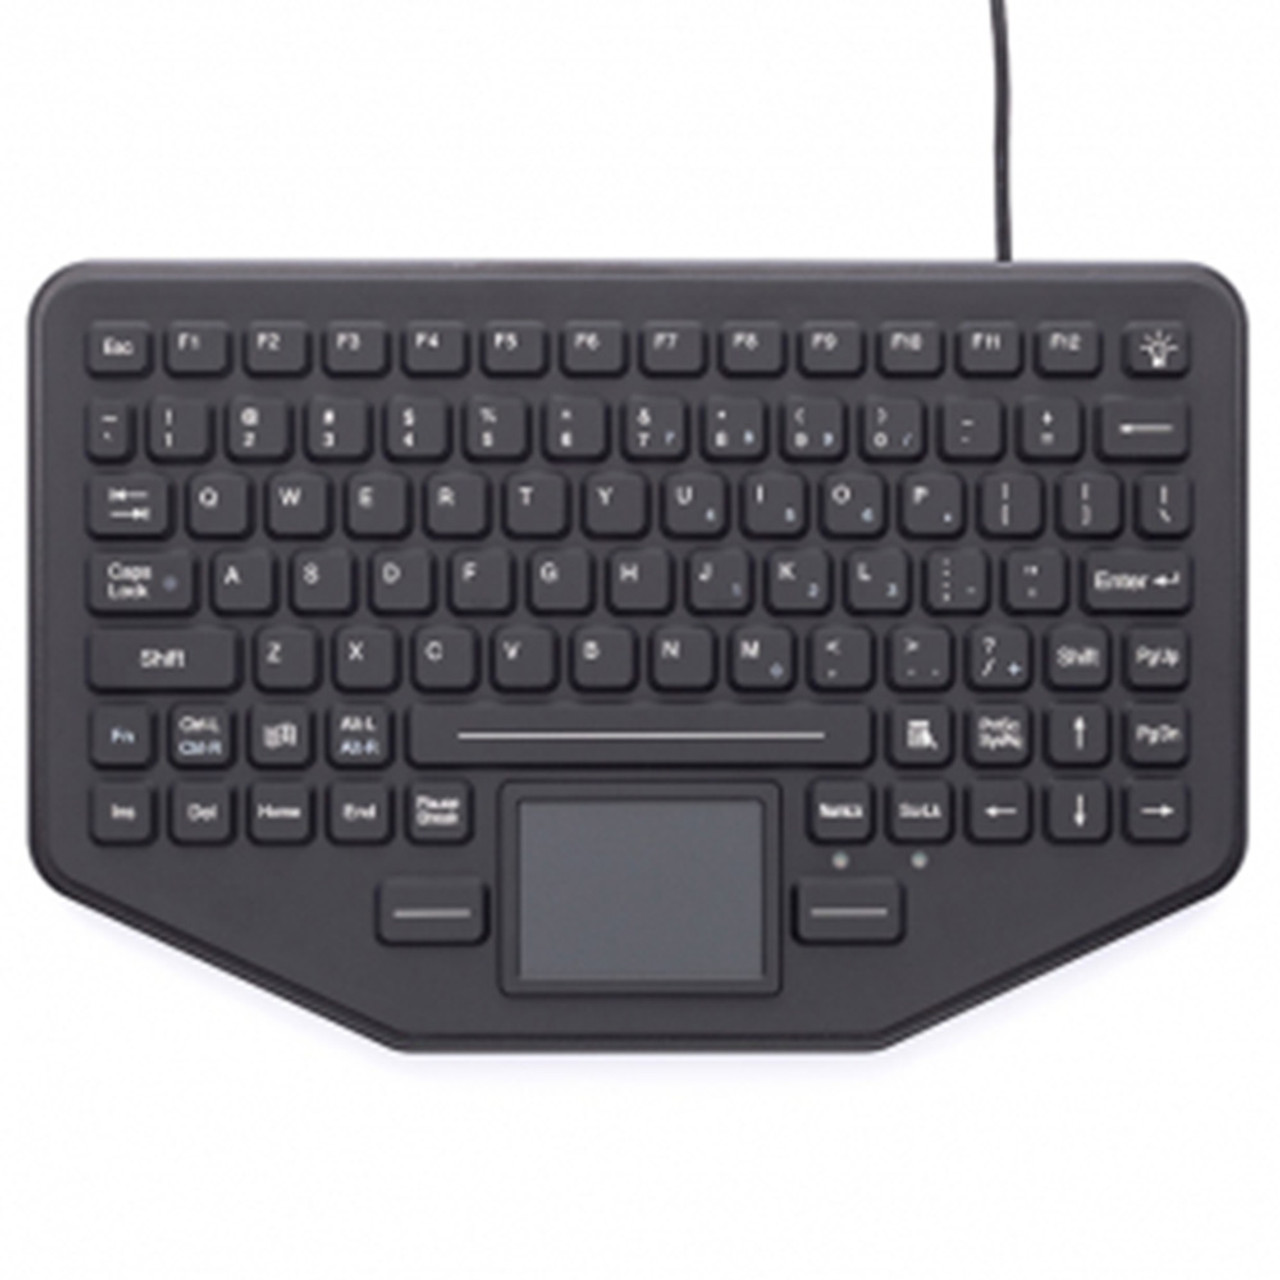 Gamber Johnson 7300-0033 iKey SkinnyBoardÂƒ?Â› Mobile Keyboard with Touchpad Measures only 0.5 inch Deep, Humidity Resistant, Compatible with all Windows and Mac OS